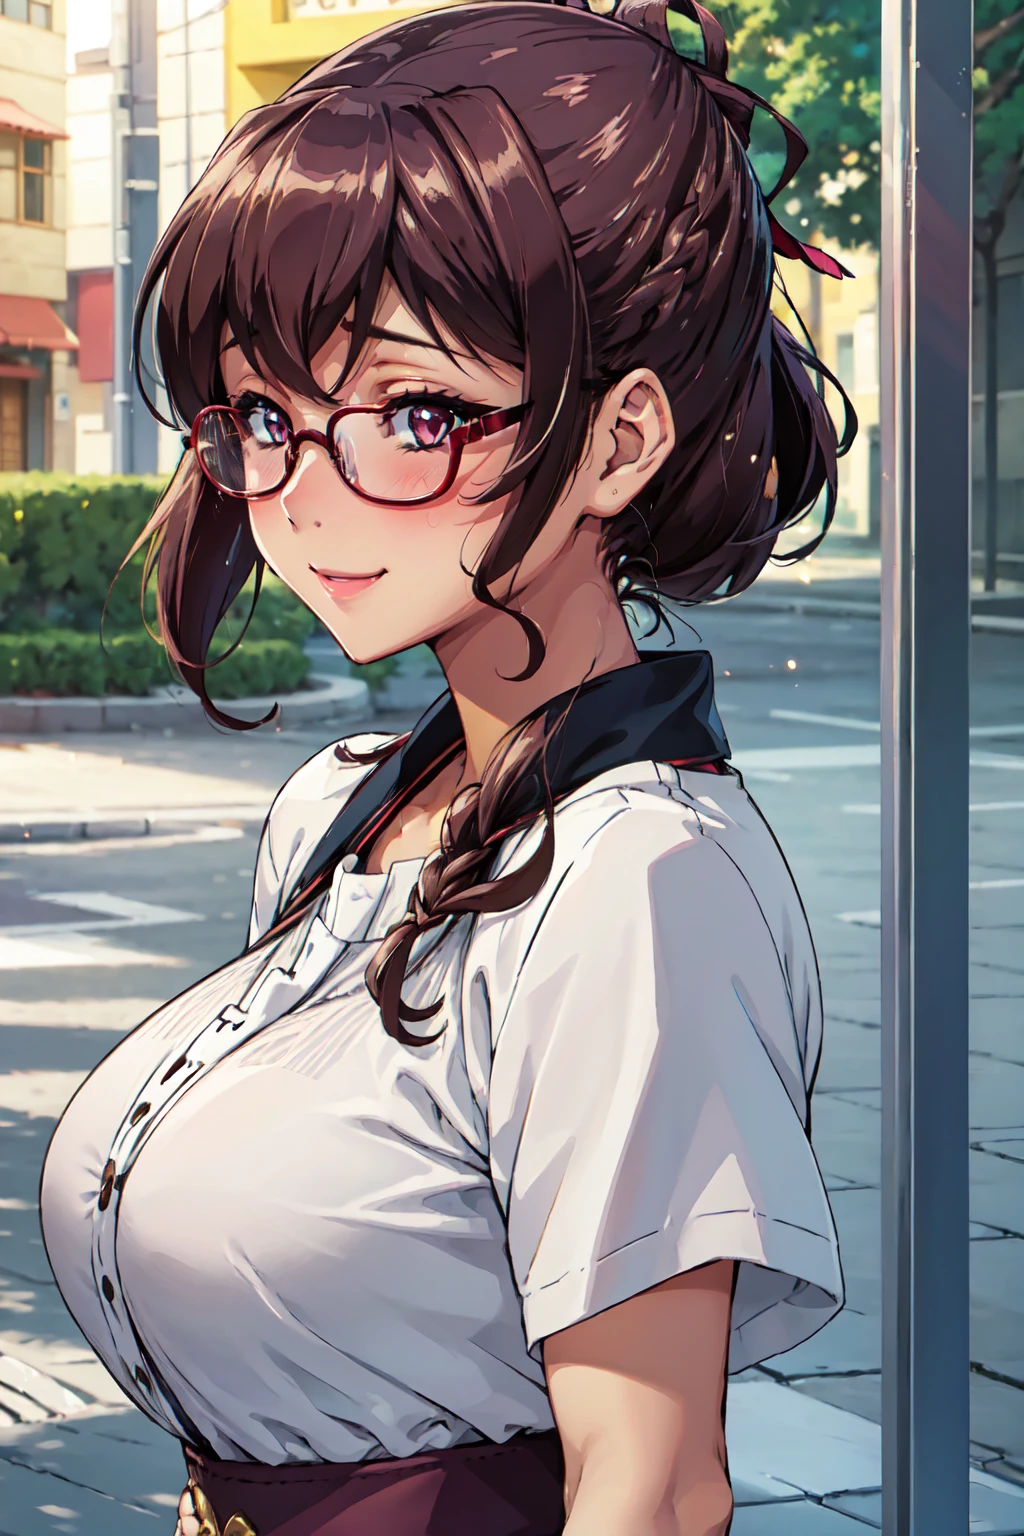 (high quality, High resolution, The finer details), Sidewalk, Side view, alone, girl, Braid, , Sparkling eyes, (large round frame glasses), (Beautiful Eyes), Big Breasts, ((A kind smile)), blush, Sweat, Oily skin, (Focus plane), Shallow depth of field